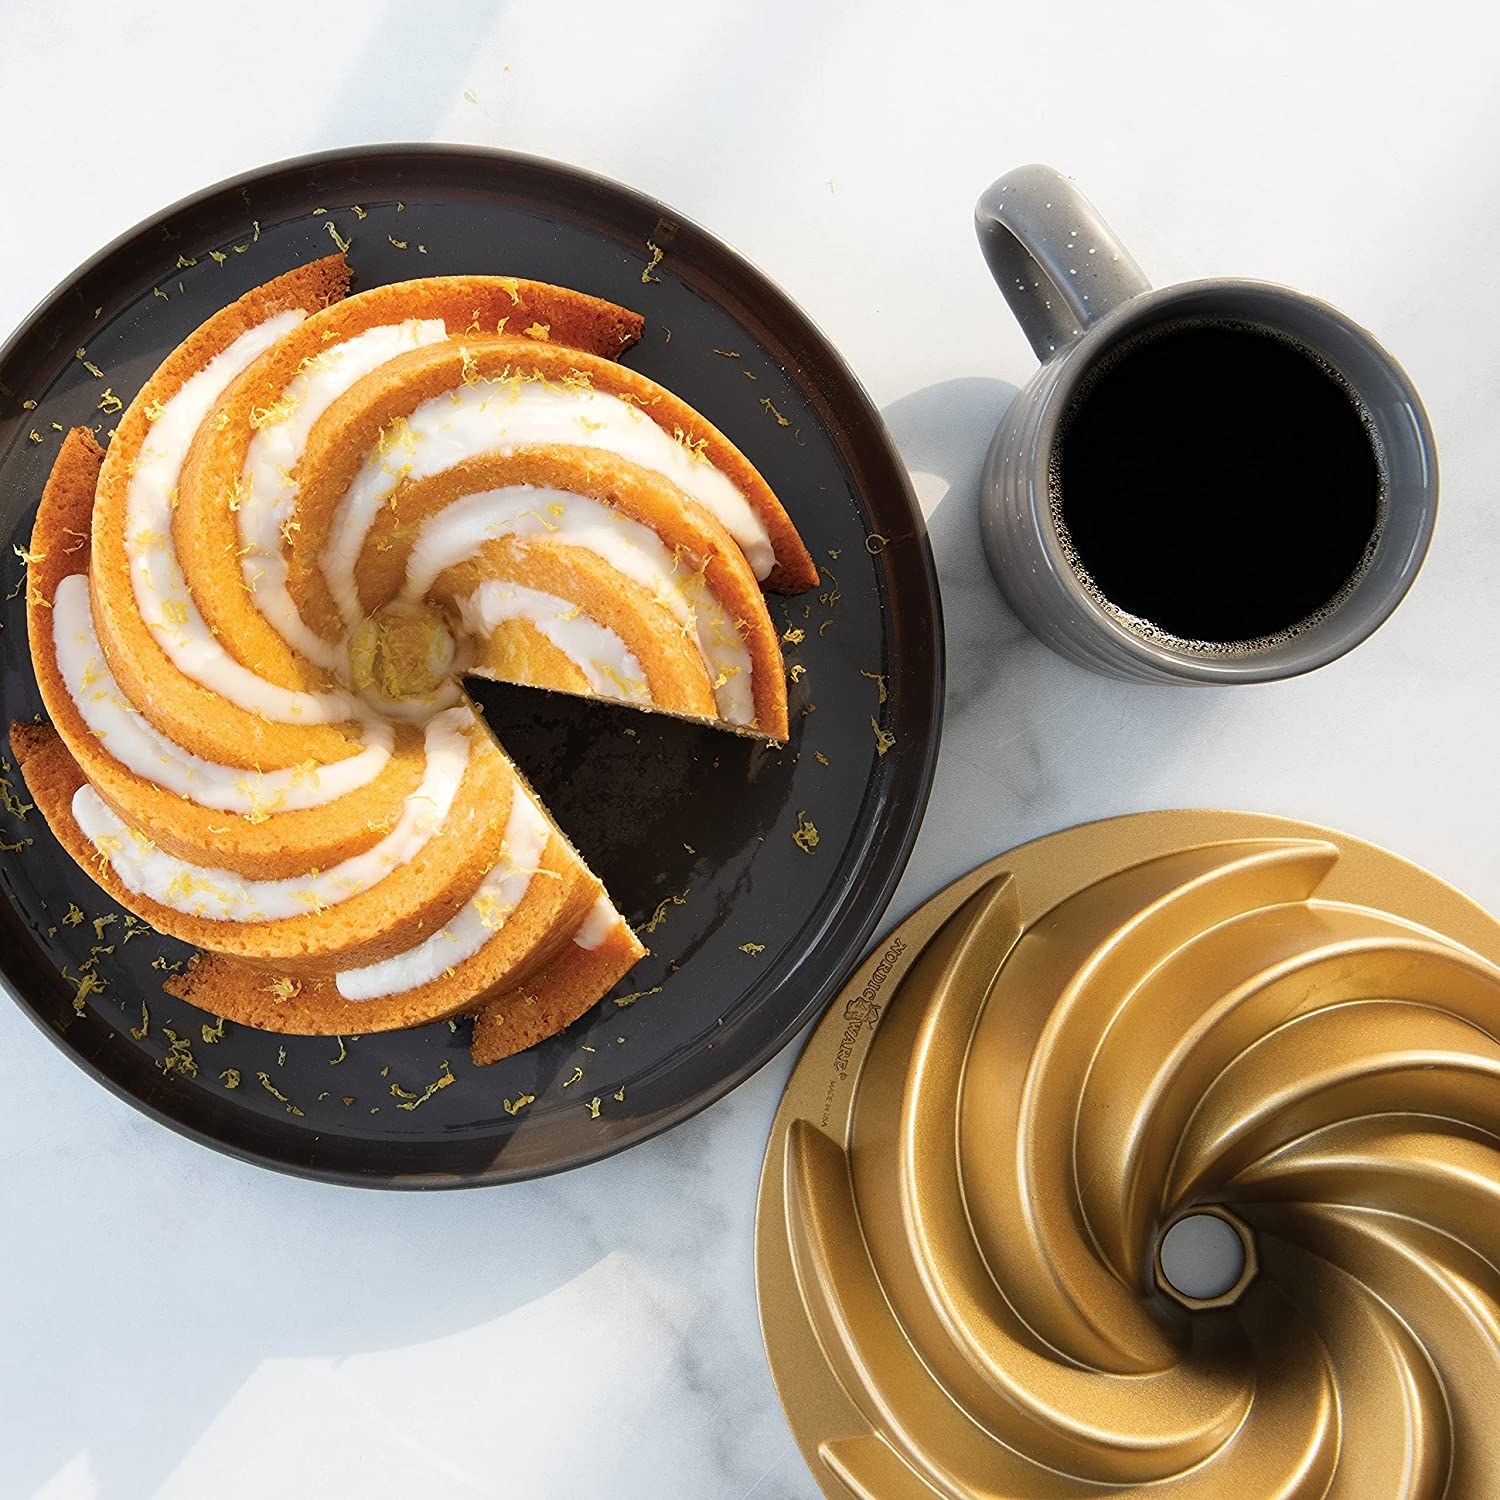 overhead shot of a bundt cake next to the gold bundt pan and a mug of coffee